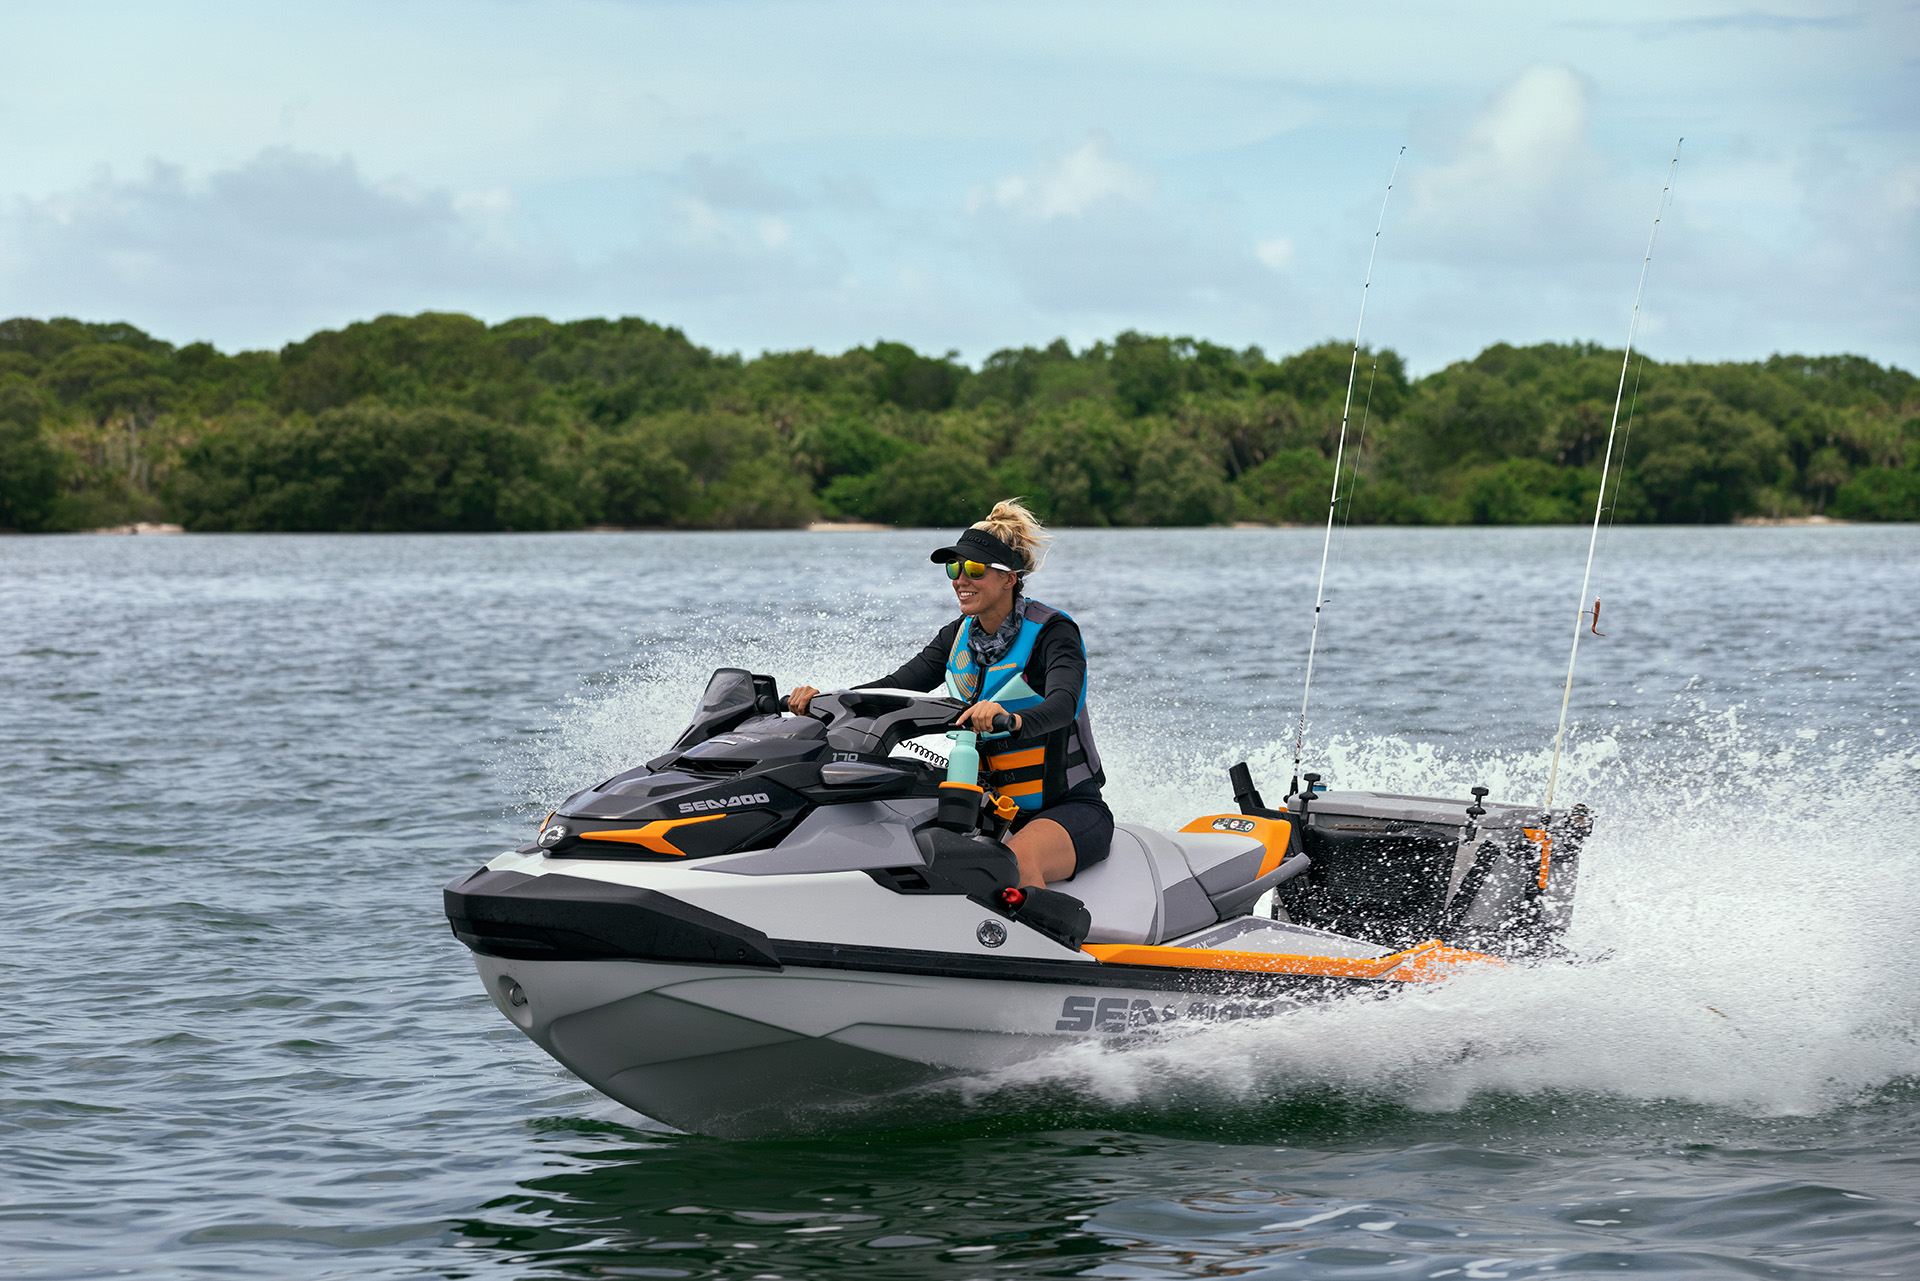 Discover the Sea-Doo lineup with SHORTSLEEVES MOTORSPORTS